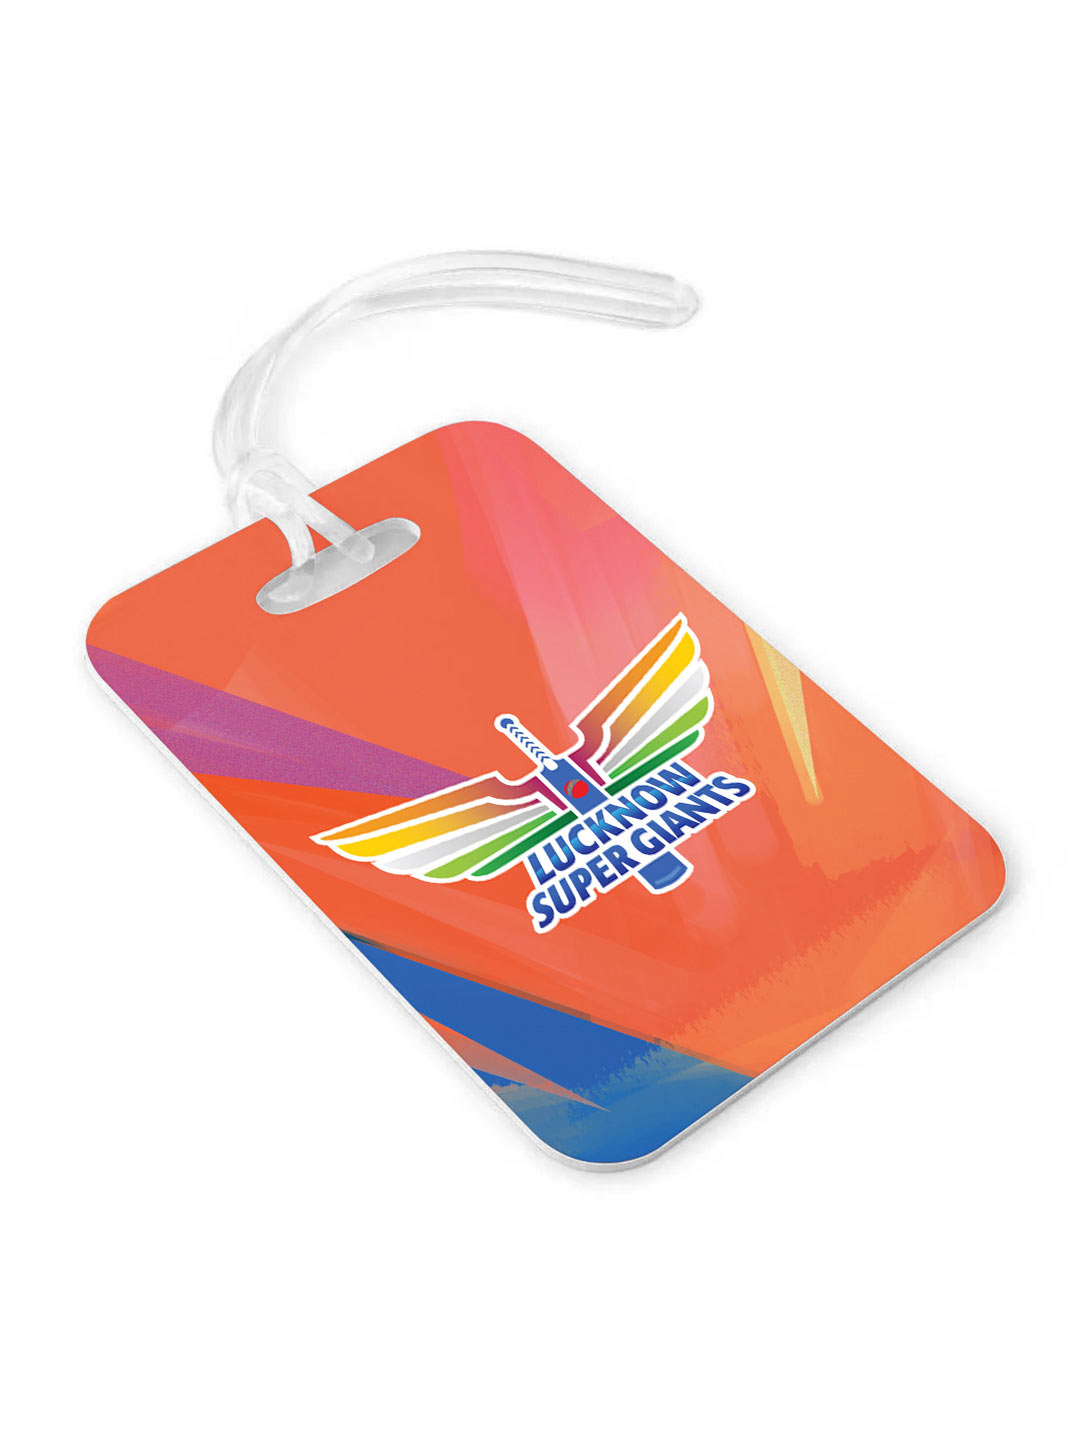 Buy Lucknow Super Giants - Luggage Bag Tags Luggage Bag Tags Online